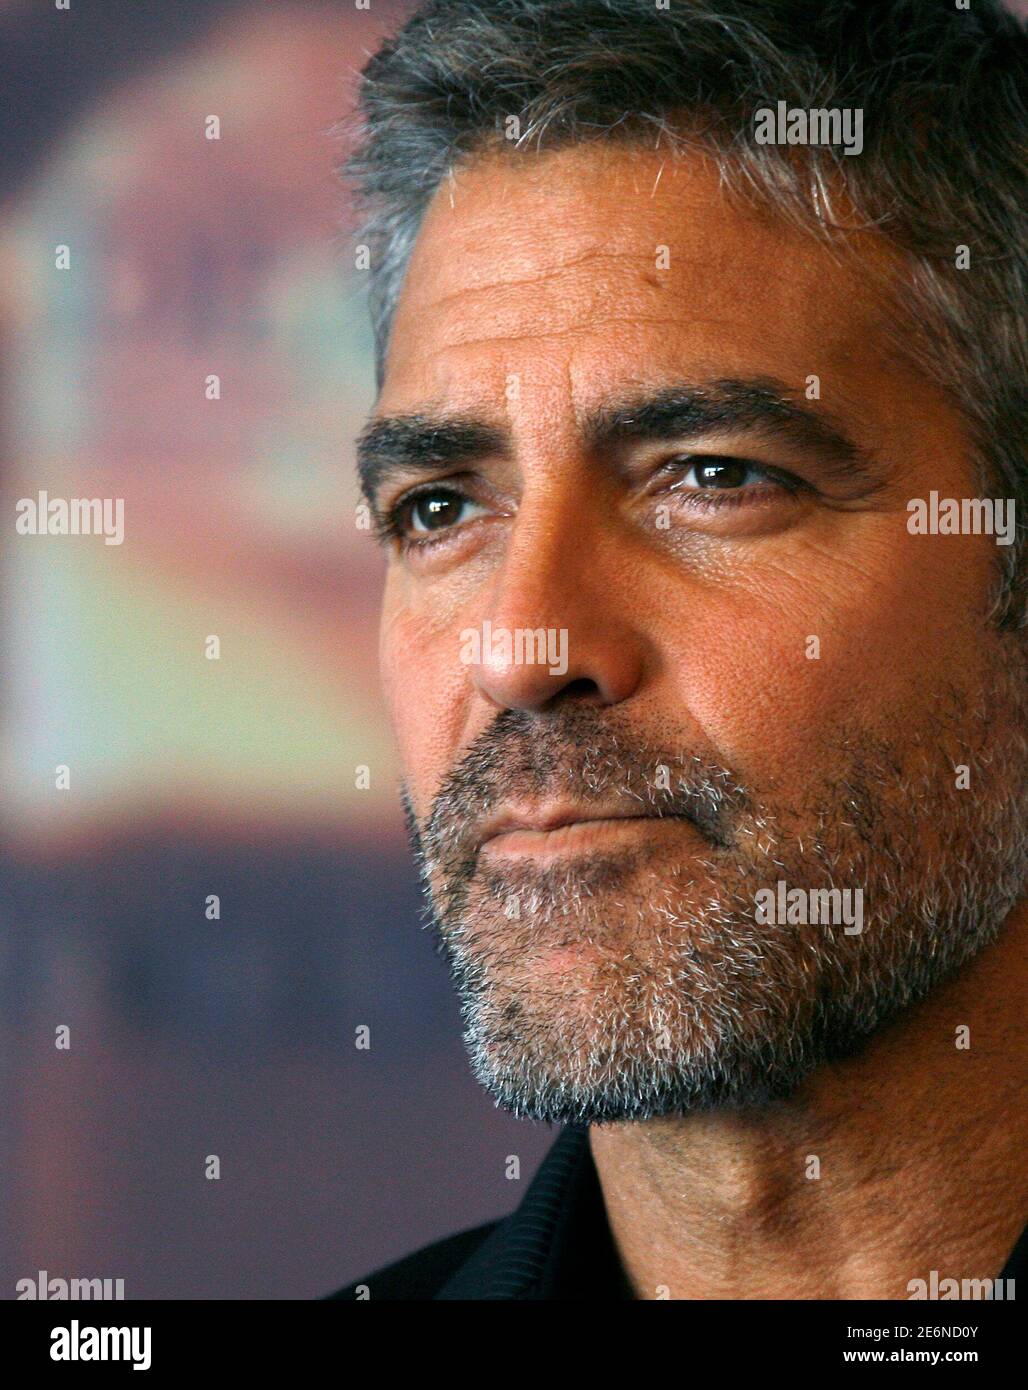 U S Actor George Clooney Poses During A Photocall For The Film Michael Clayton At The 33nd American Film Festival Of Deauville In France September 2 2007 Reuters Vincent Kessler France Stock Photo Alamy